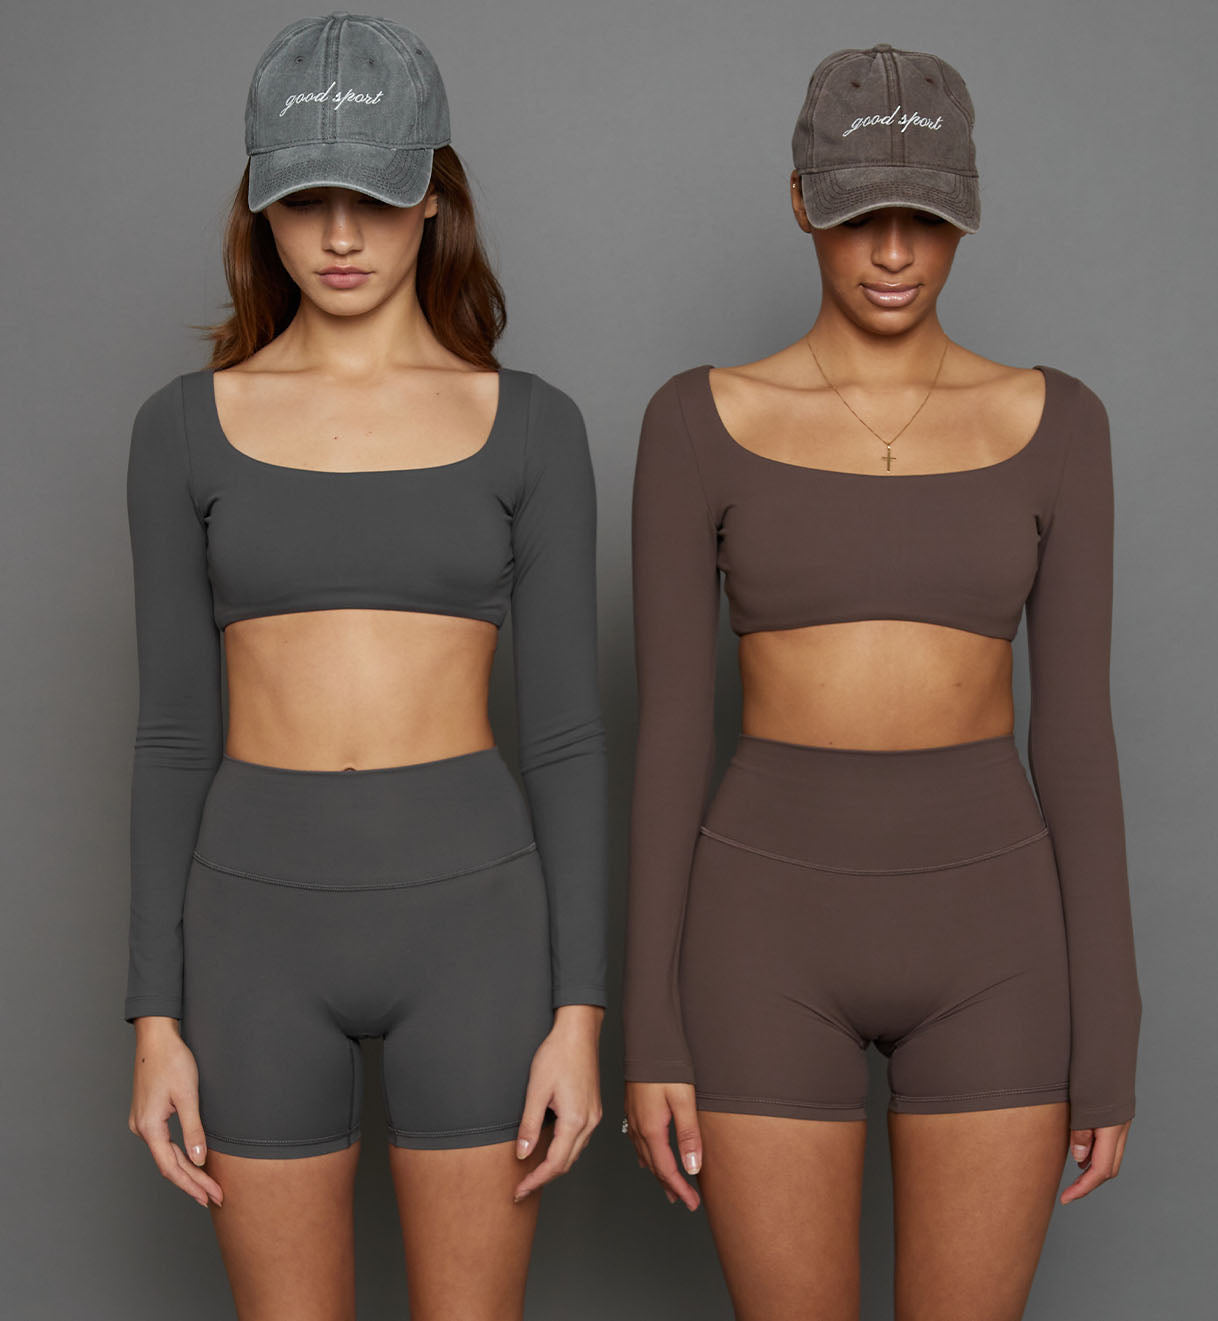 Elevating my workout style with these cute athletic outfits from